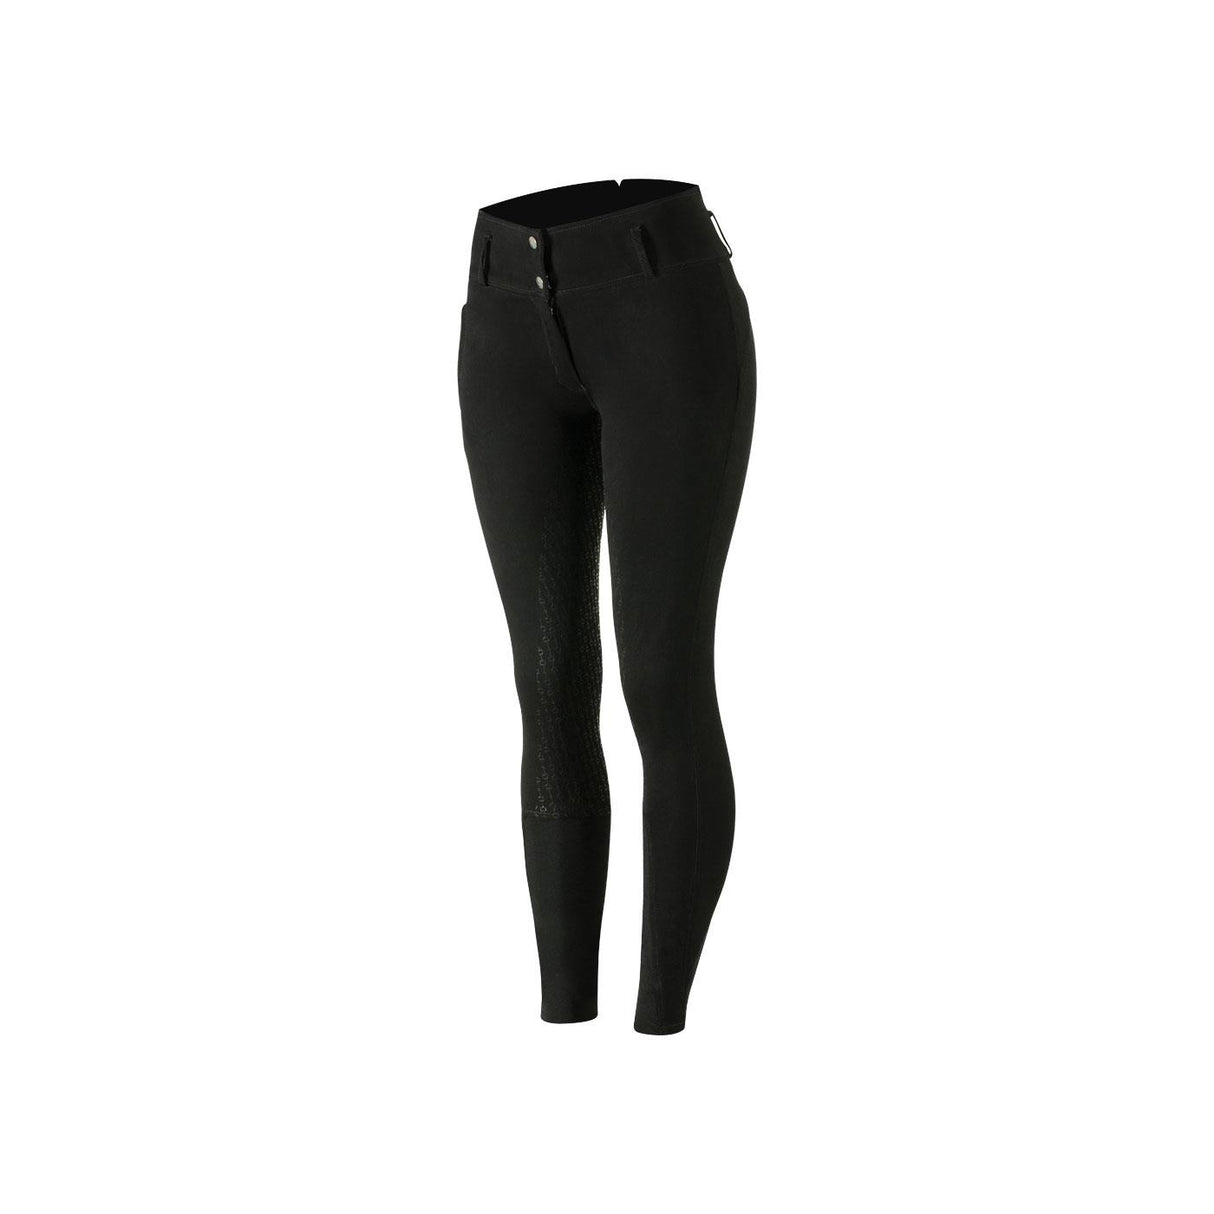 Buy Horze Women's Silicone Full Seat Riding Tights with Phone Pocket